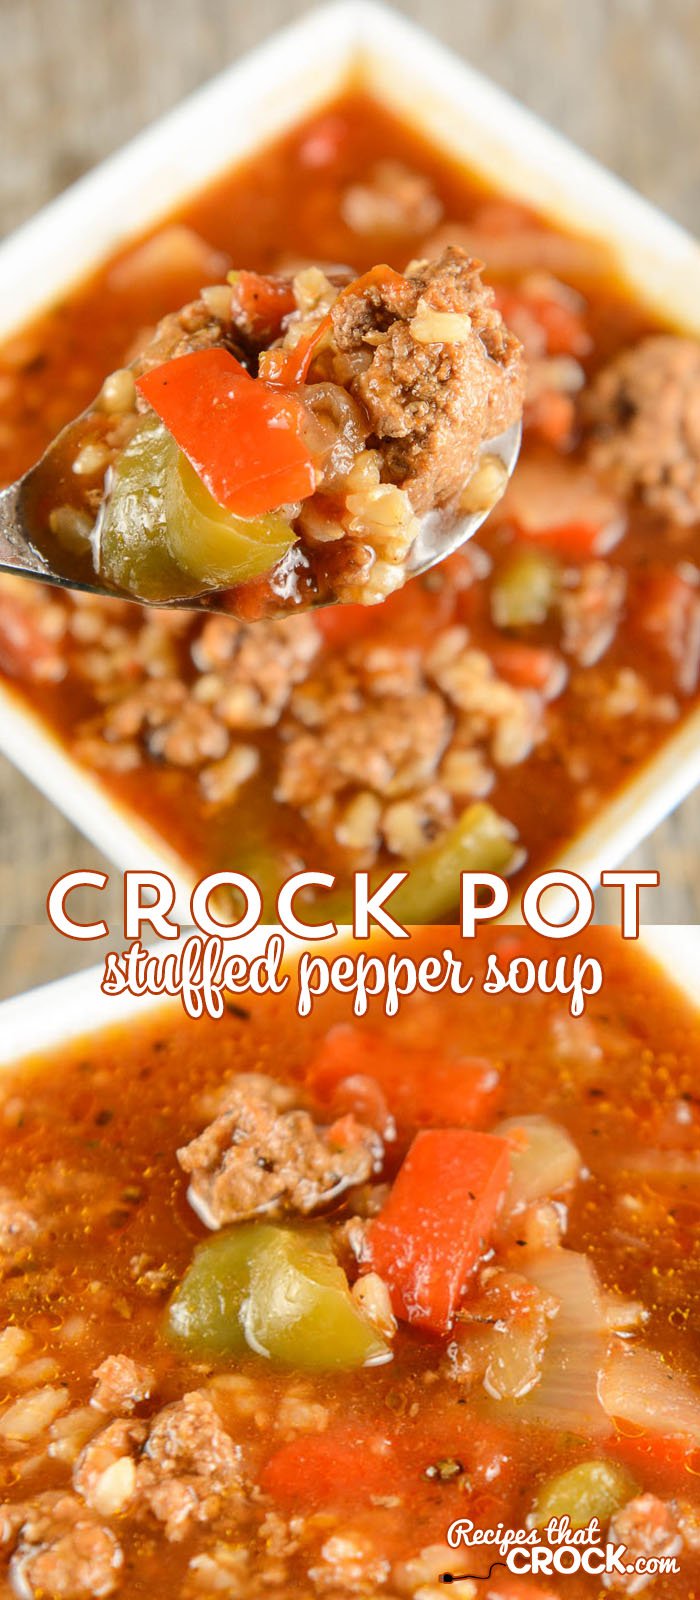 Over 15 Delicious Looking Slow Cooker Soup Recipes that look easy and delicious - www.kidfiendlythingstodo.com 